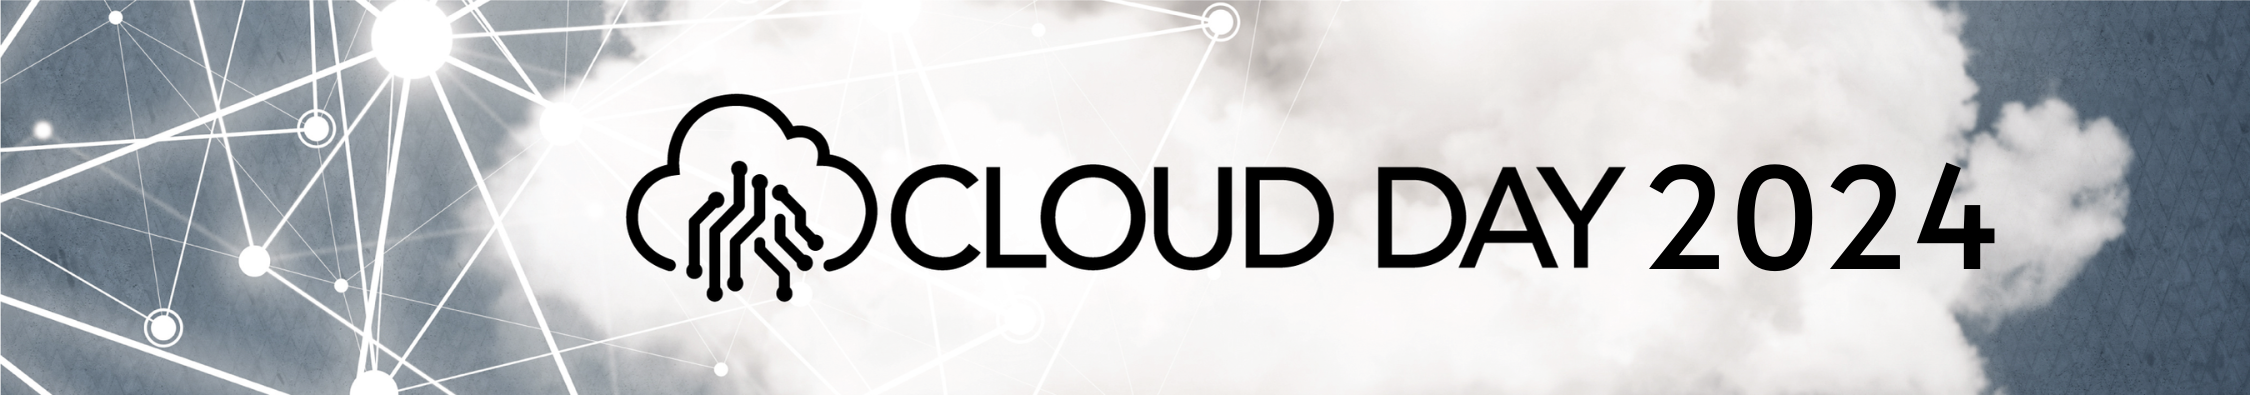 Banner dell'evento Cloud Day 2024